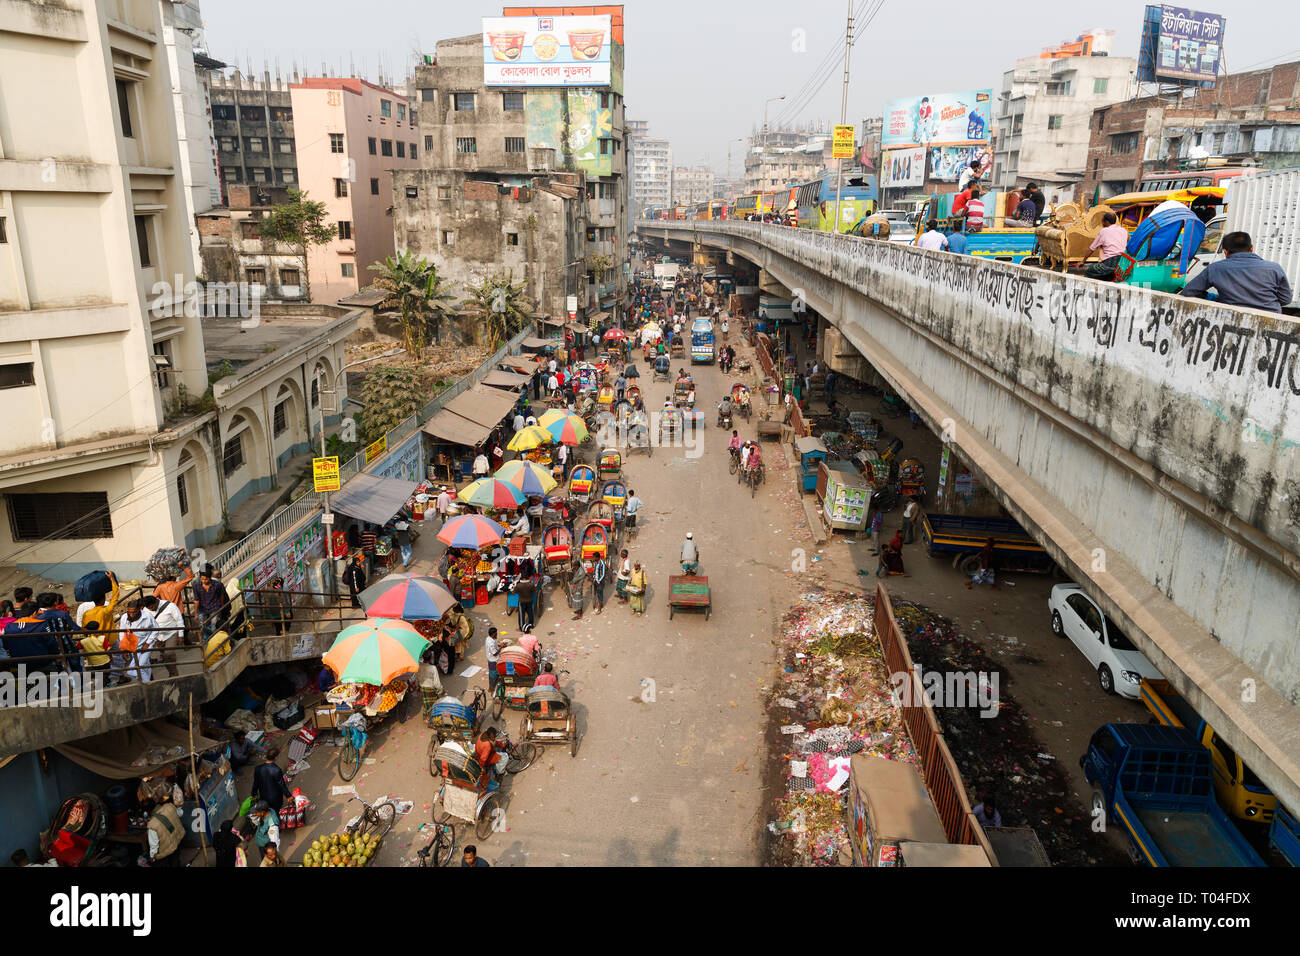 Busy traffic filling a street in central Dhaka. Cycle rickshaws, buses, people and cars compete for space on the crowded street. Stock Photo